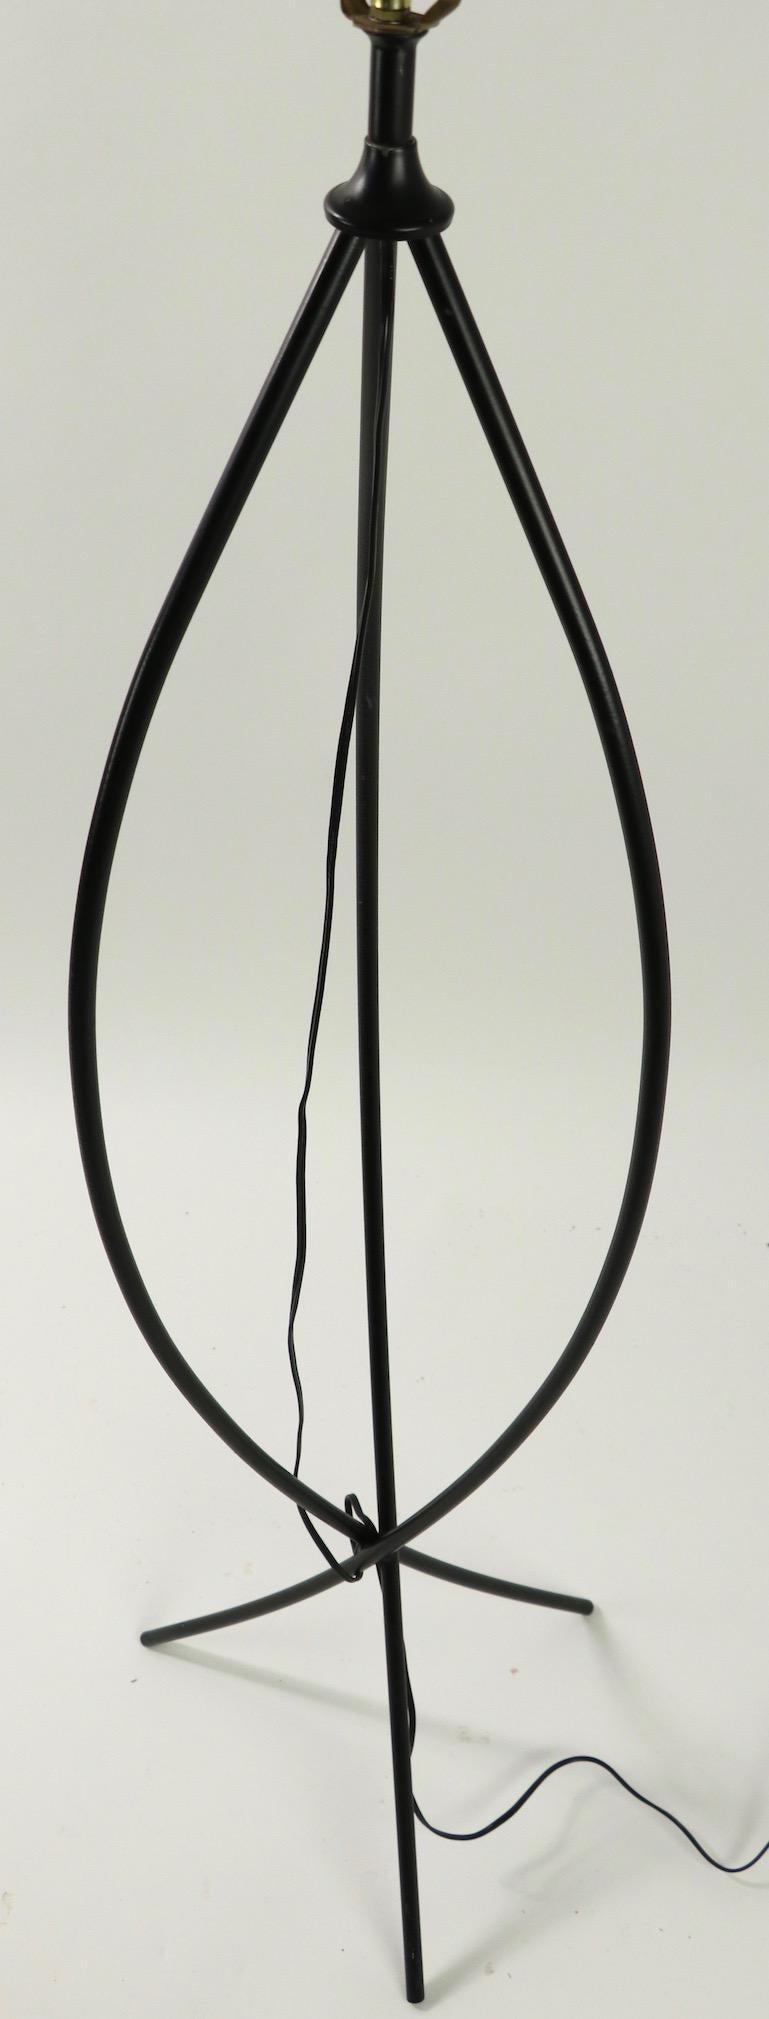 Mid Century Wrought Iron Floor Lamp after Thurston In Good Condition For Sale In New York, NY